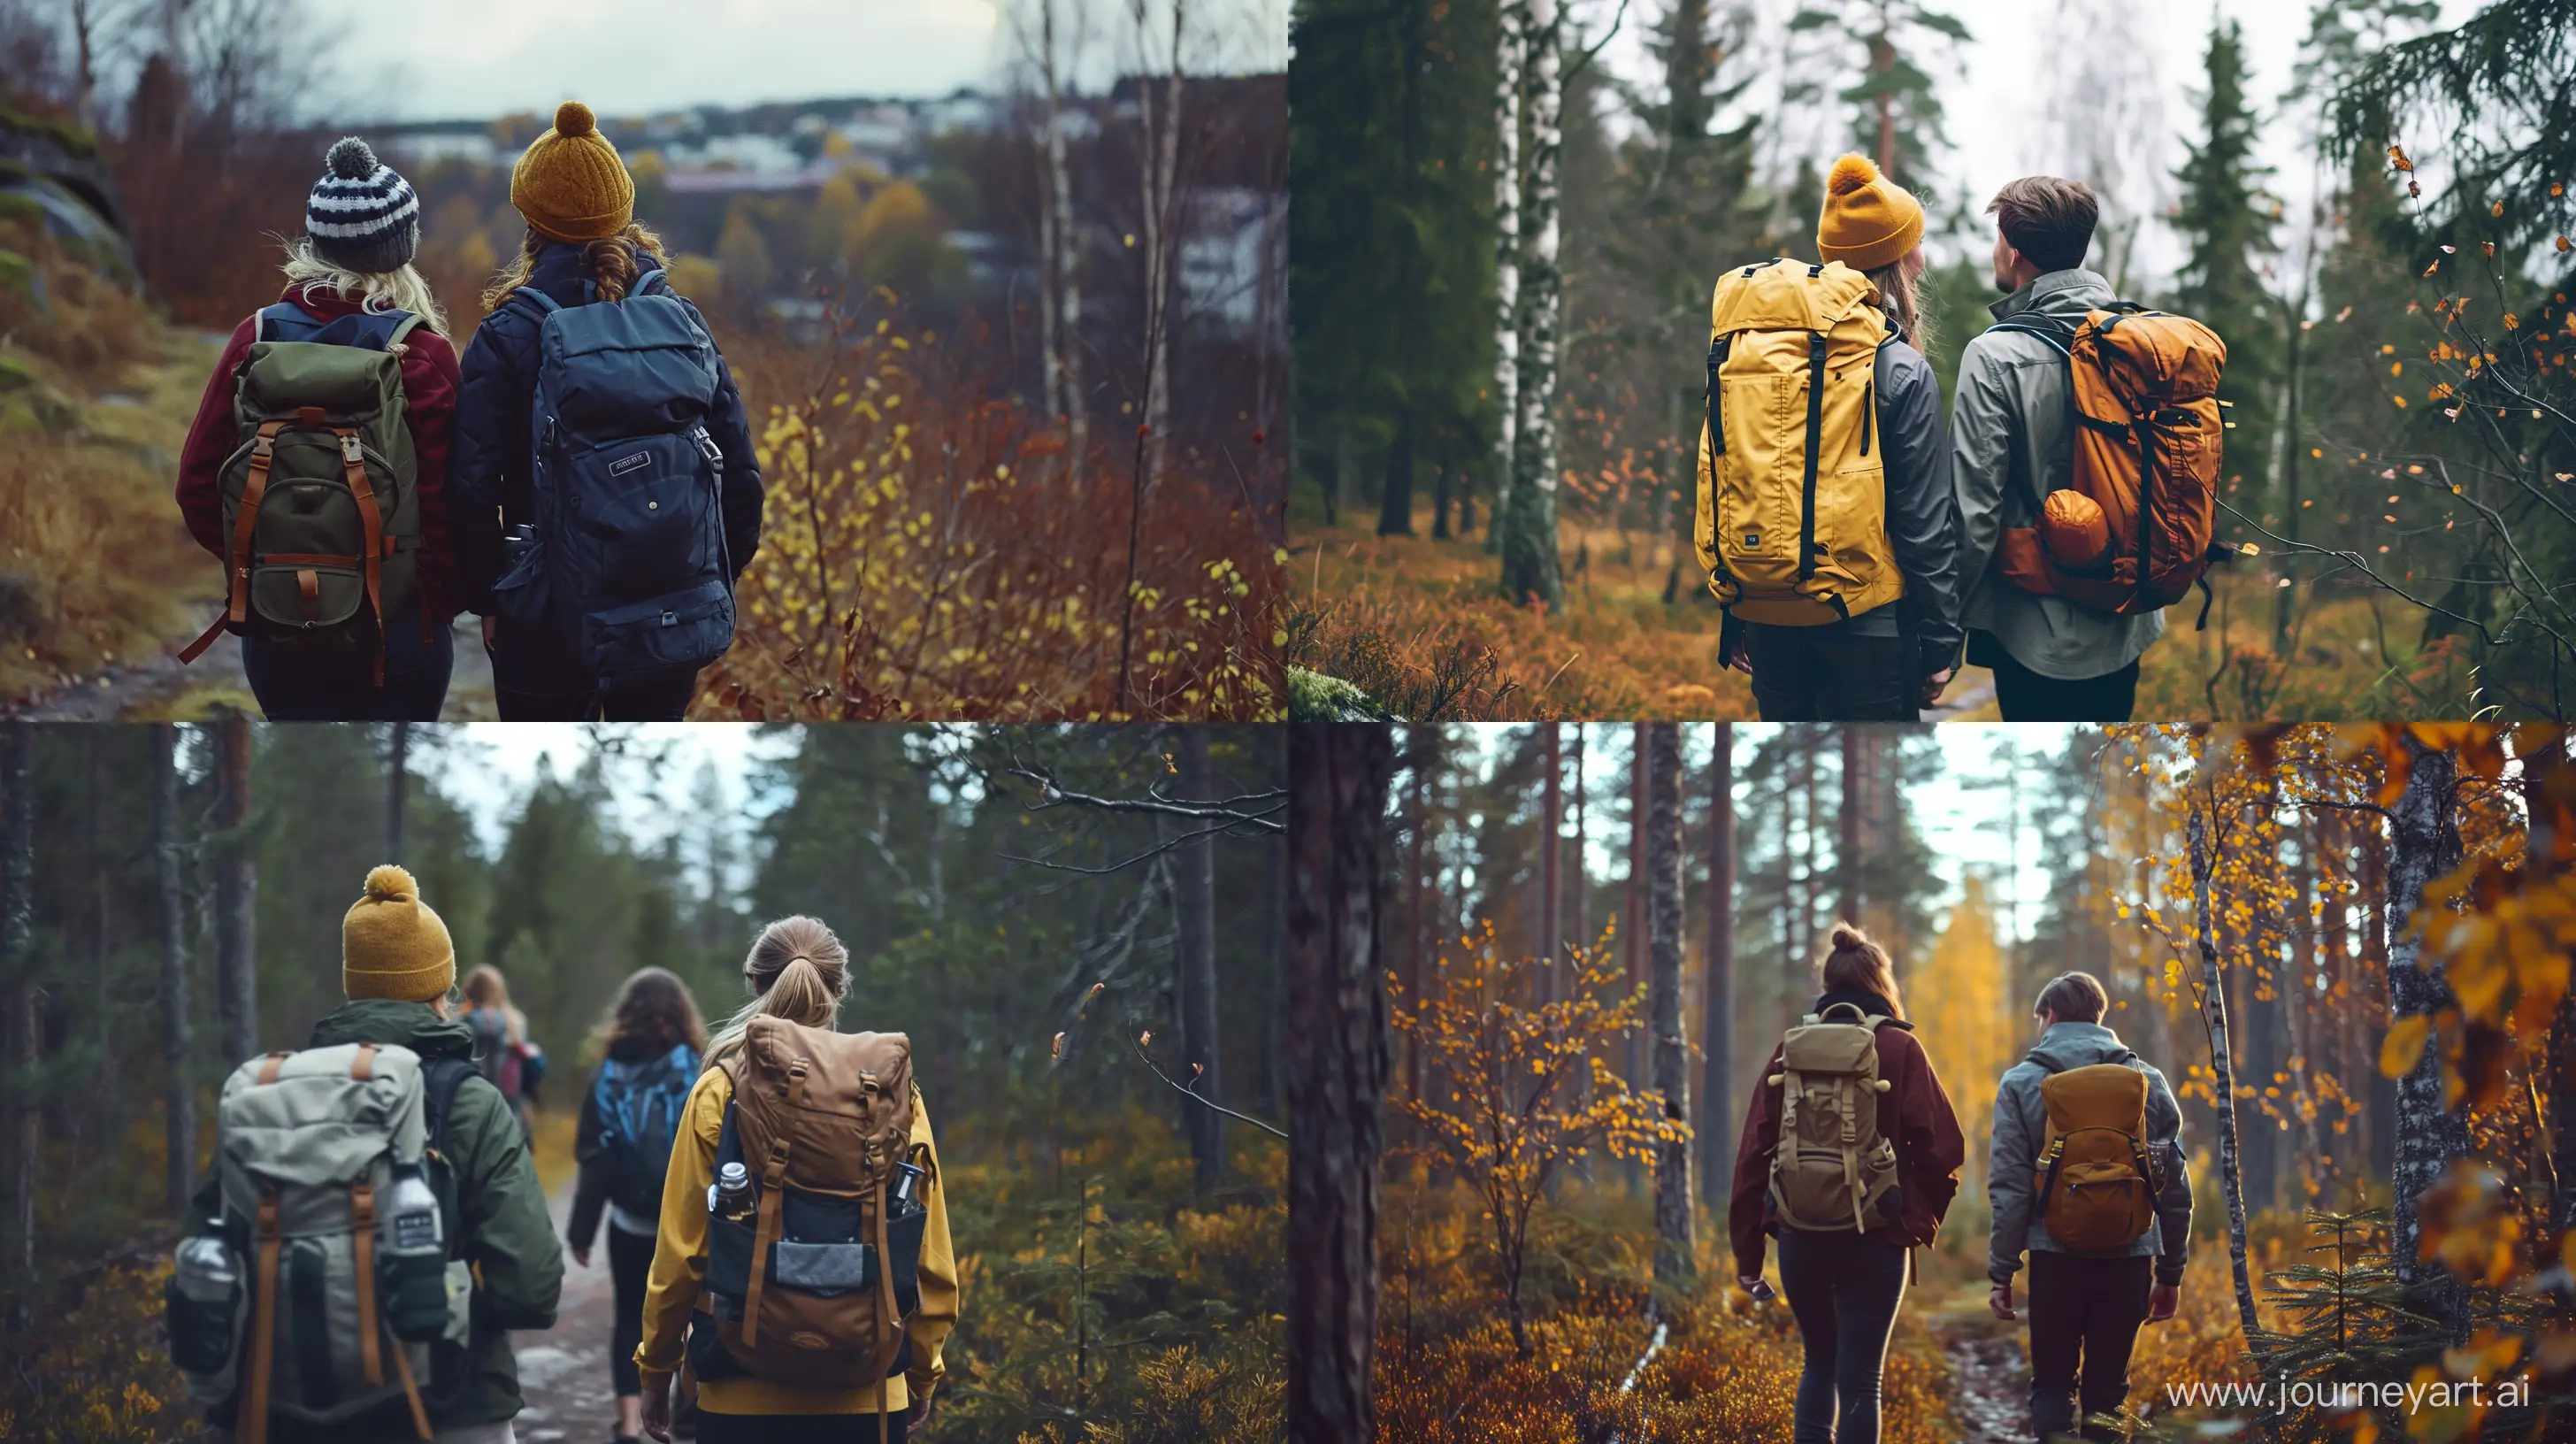 hiking adventure, in the style of a stock photo, smart casual, diverse, relatable personality, cheerful muted color palette with texture, flickr, provia, minimal retouching, the helsinki school --ar 1920:1080